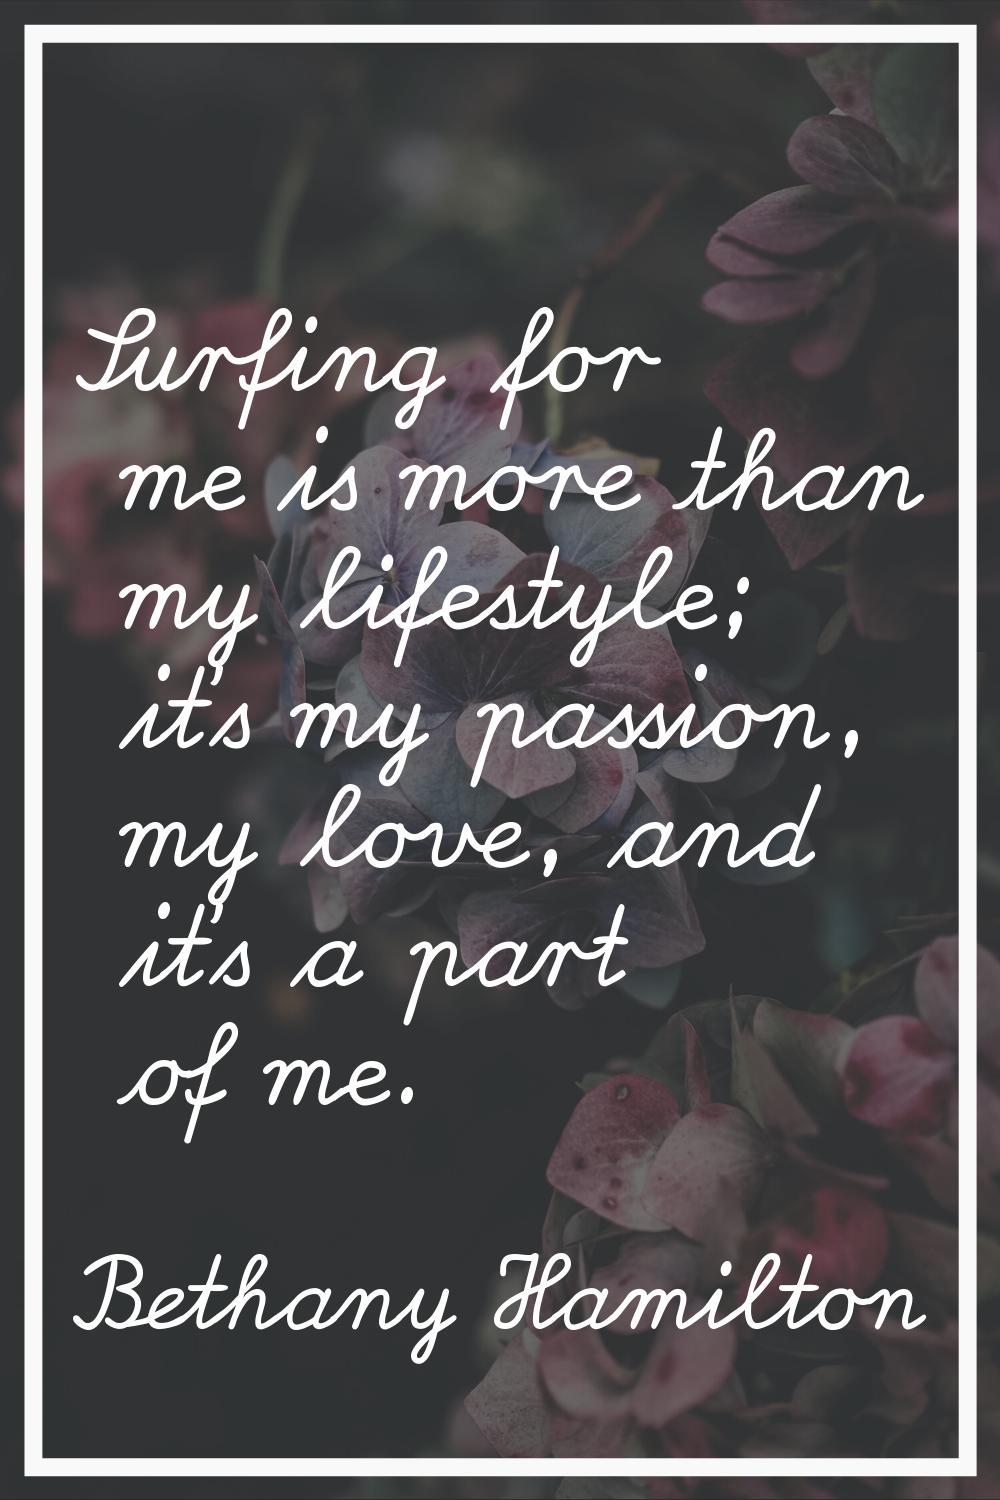 Surfing for me is more than my lifestyle; it's my passion, my love, and it's a part of me.